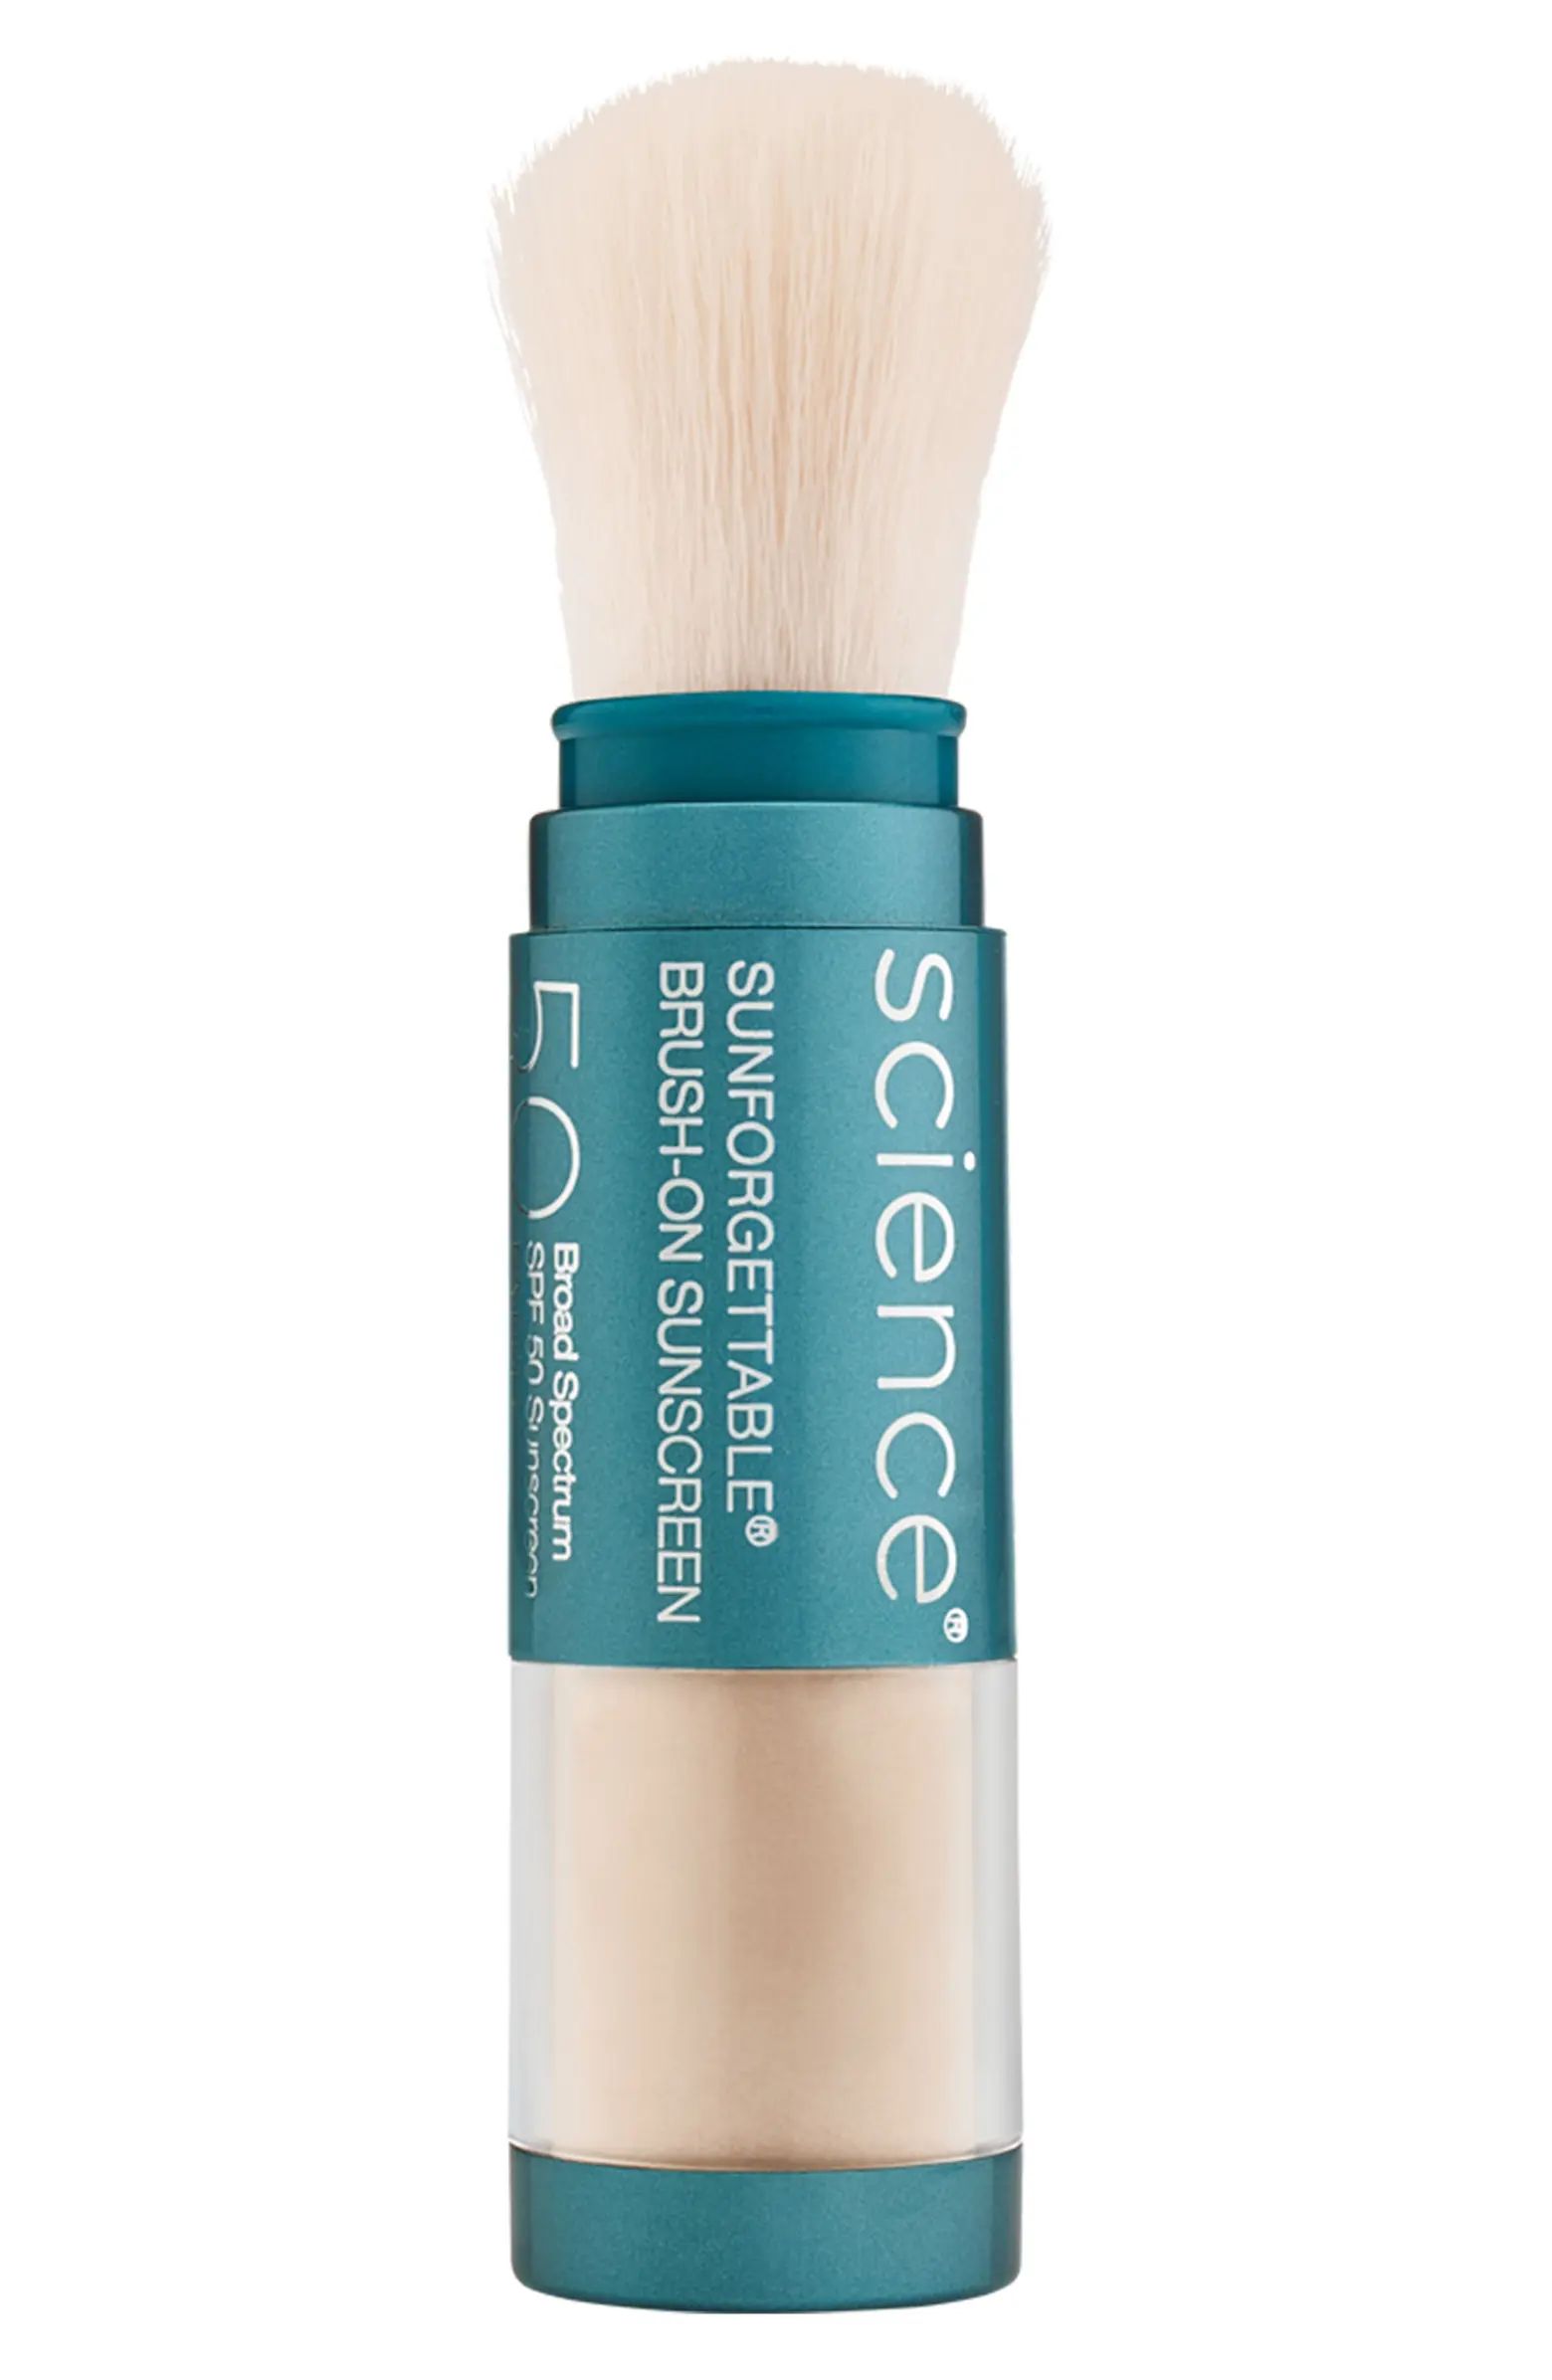 Sunforgettable® Total Protection Brush-On Sunscreen SPF 50 | Nordstrom